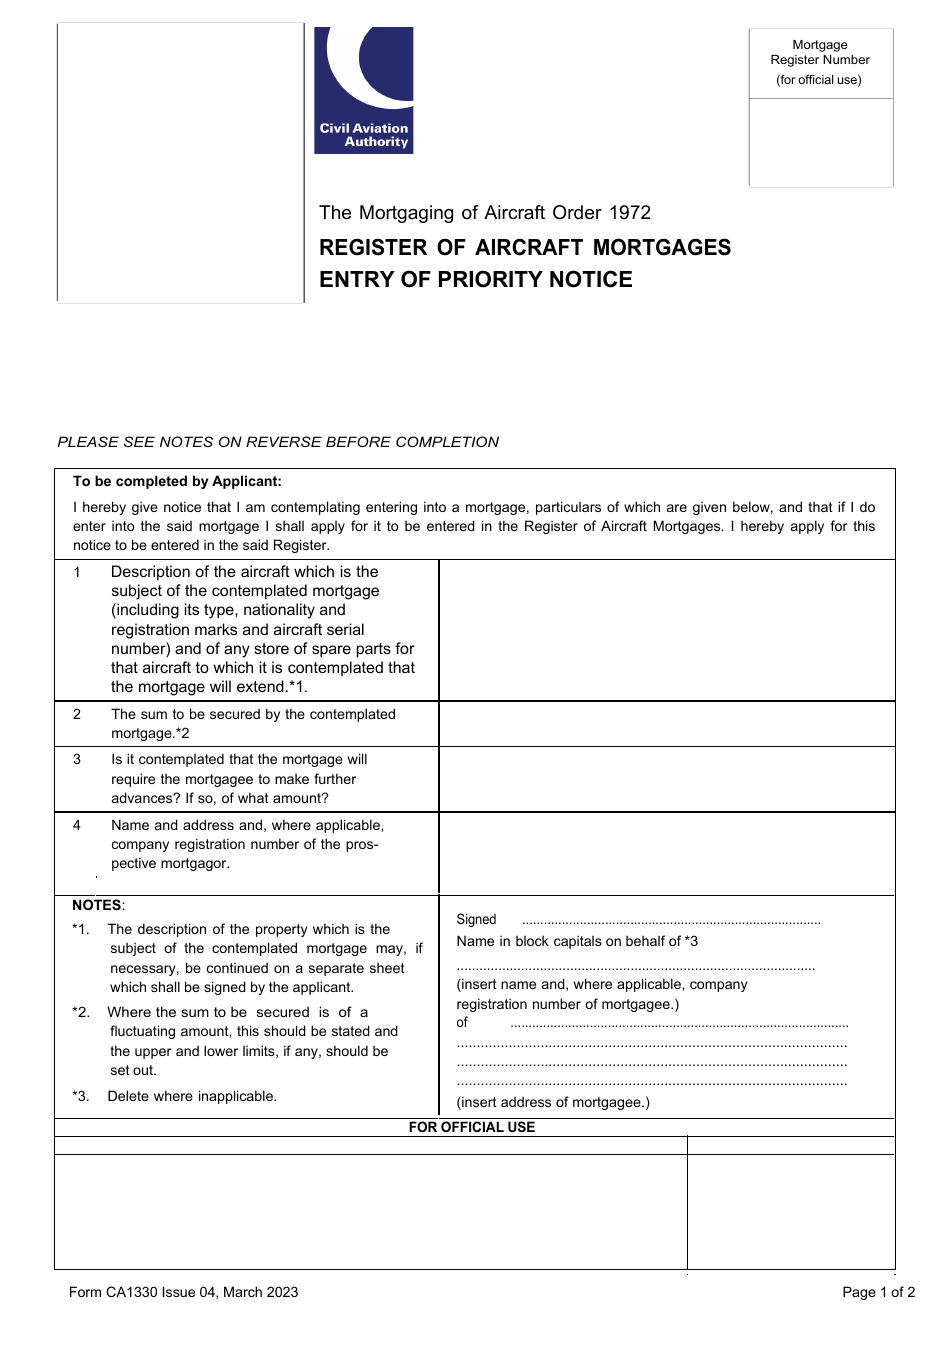 Form CA1330 Register of Aircraft Mortgages Entry of Priority Notice - United Kingdom, Page 1